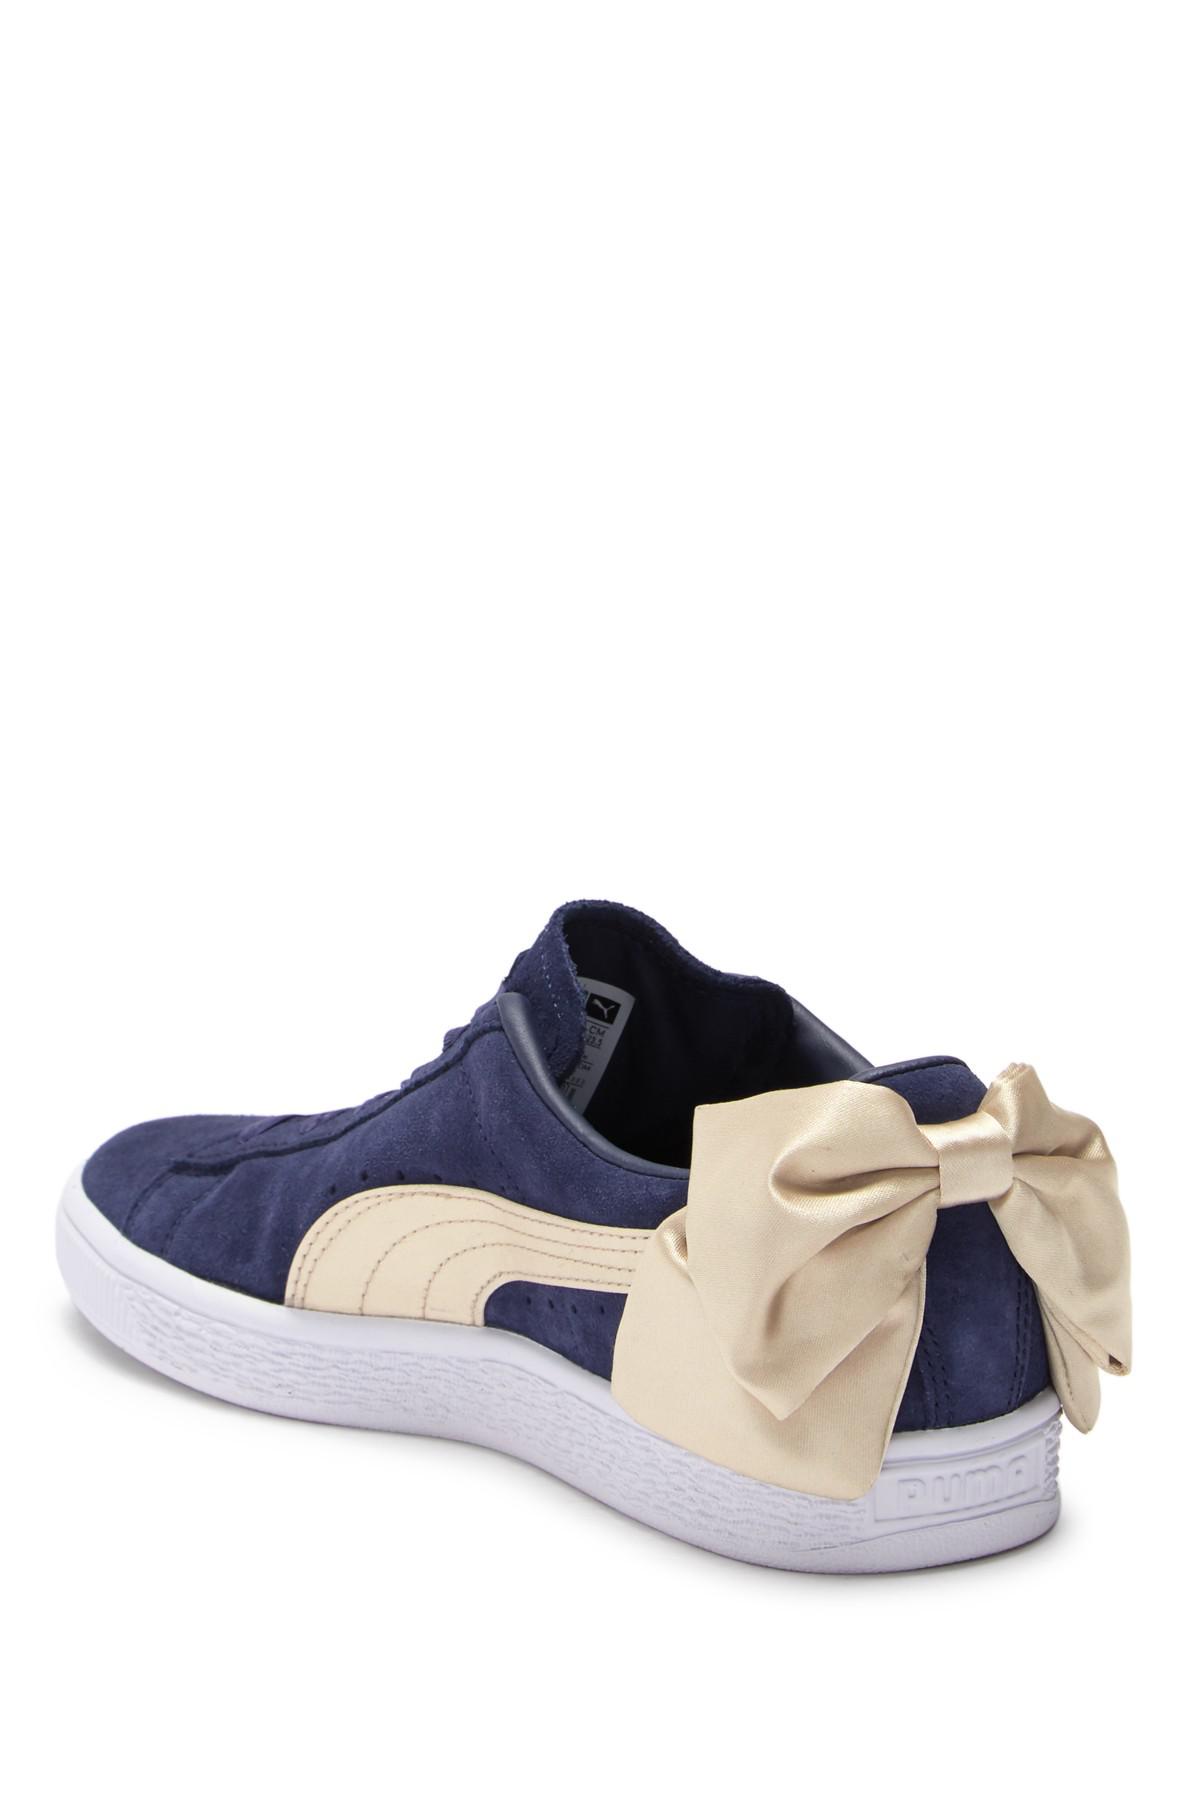 PUMA Leather Suede Bow Varsity Trainers Peacoat/metallic Gold in Blue | Lyst